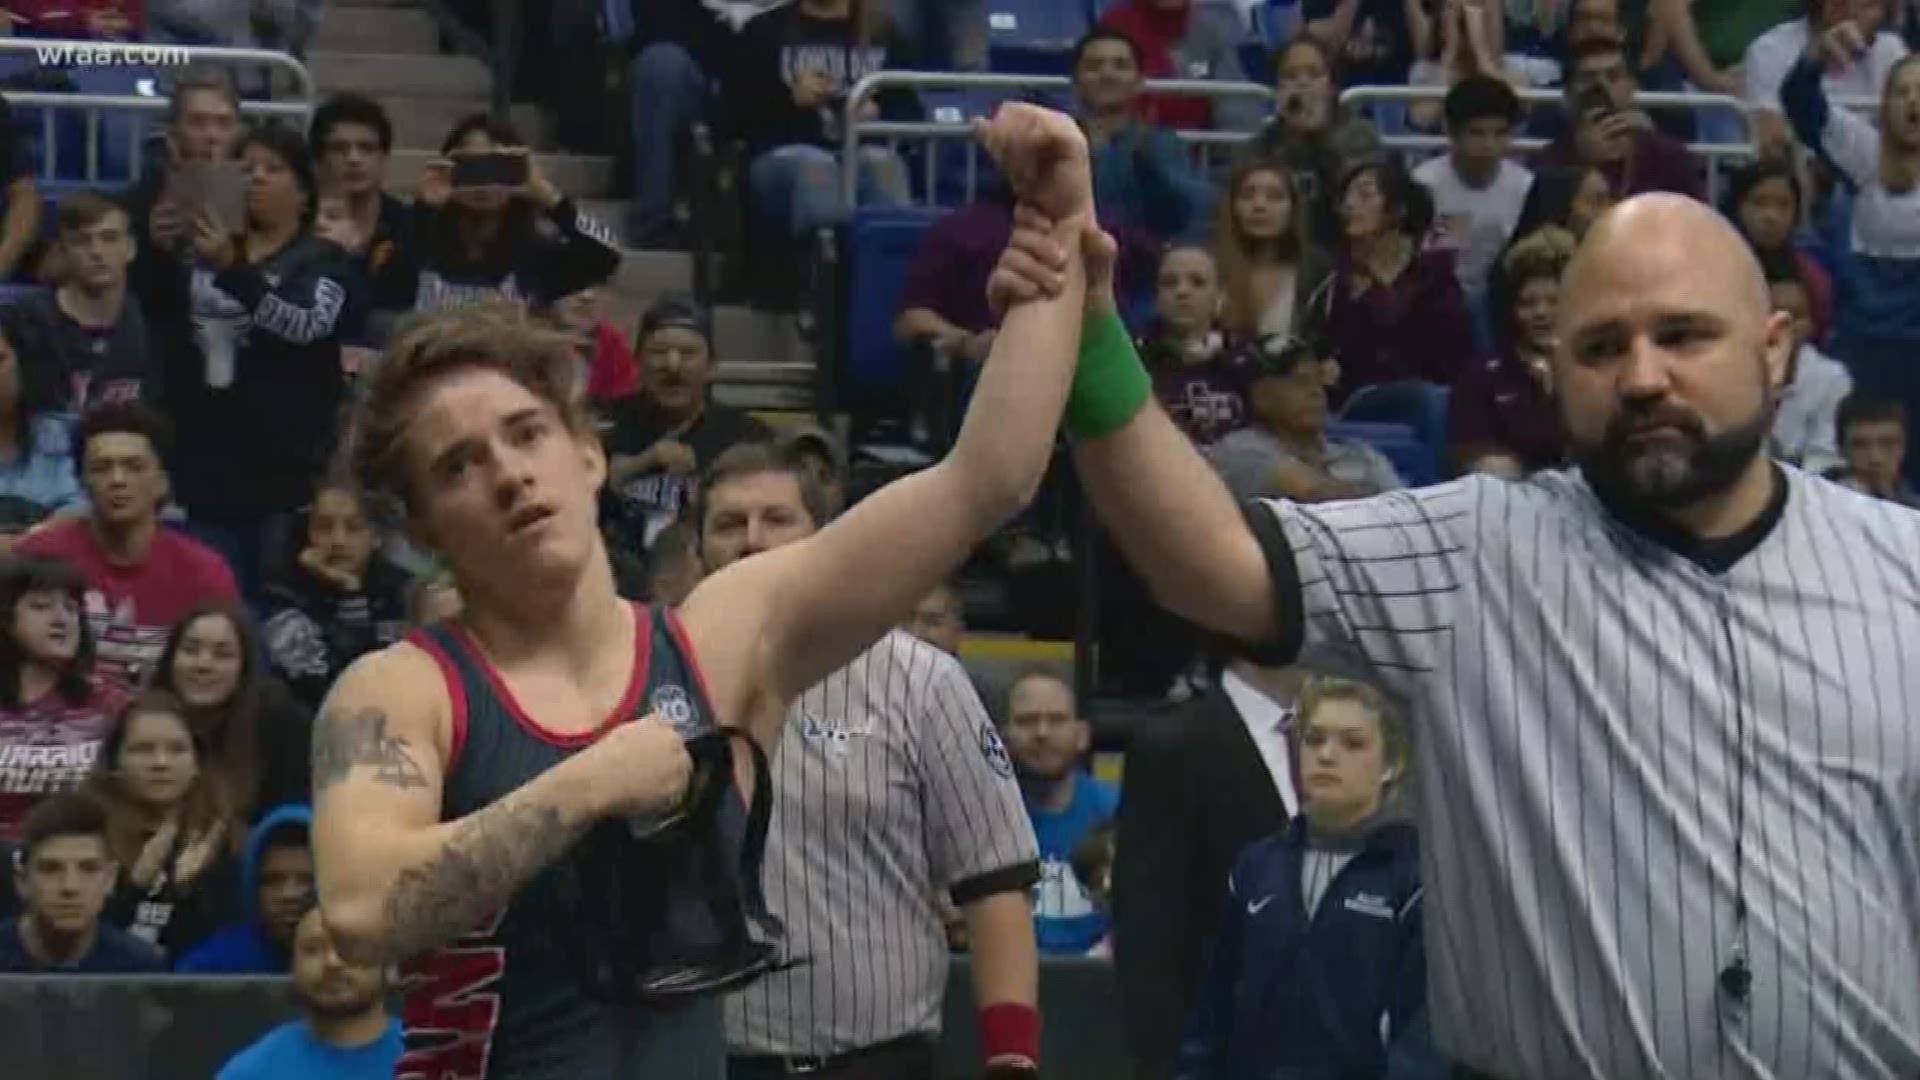 Euless Transgender wrestler Mack Beggs has won his second straight state title. in a dramatic finish, Beggs rolled out of a possible pinfall to avoid defeat and win state. This was met with boos from the crowd.